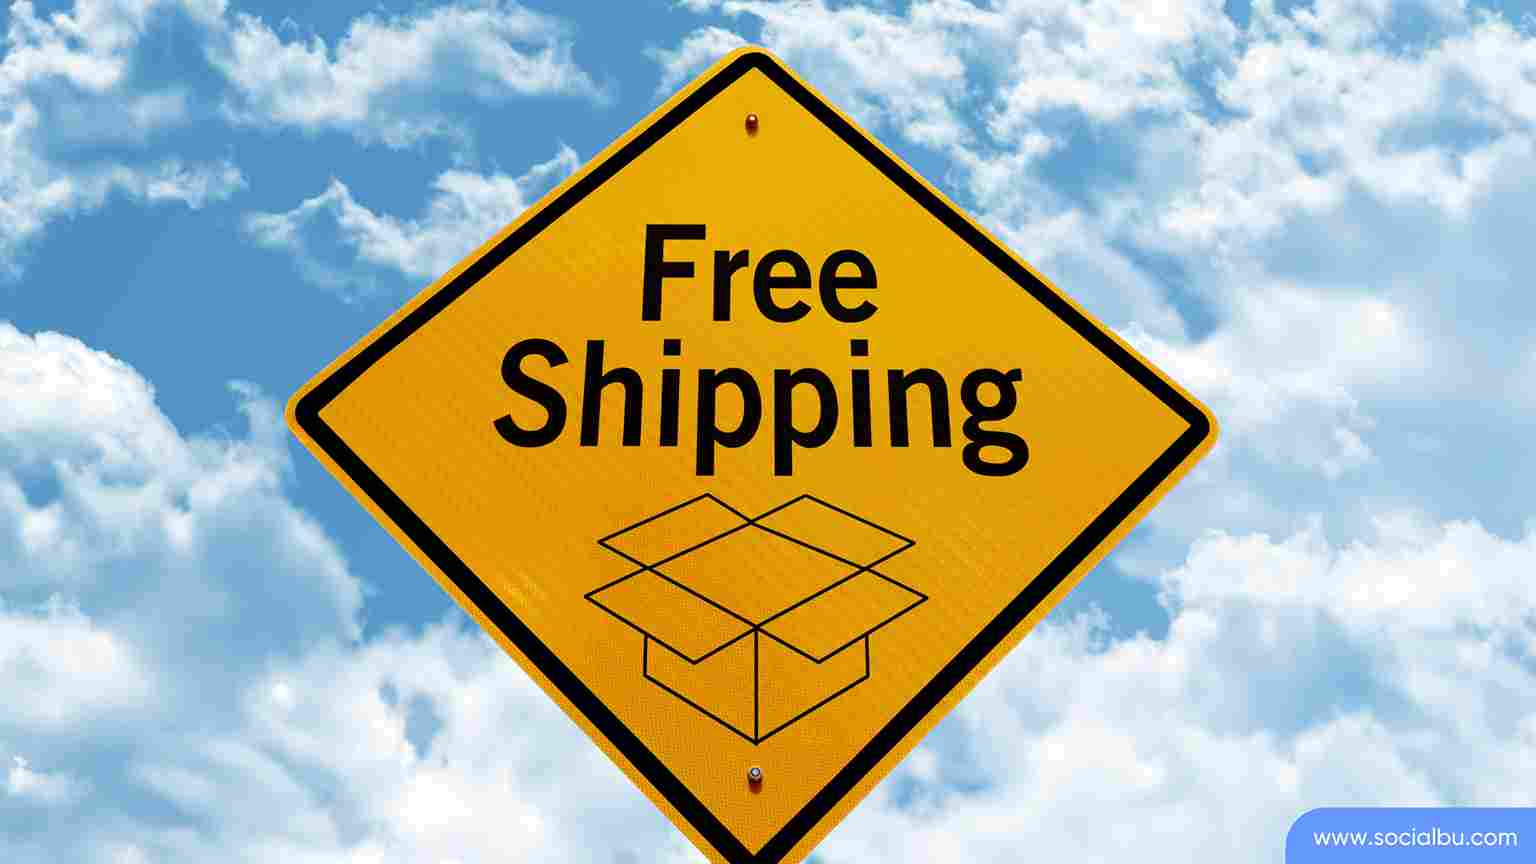 Offer free shipping